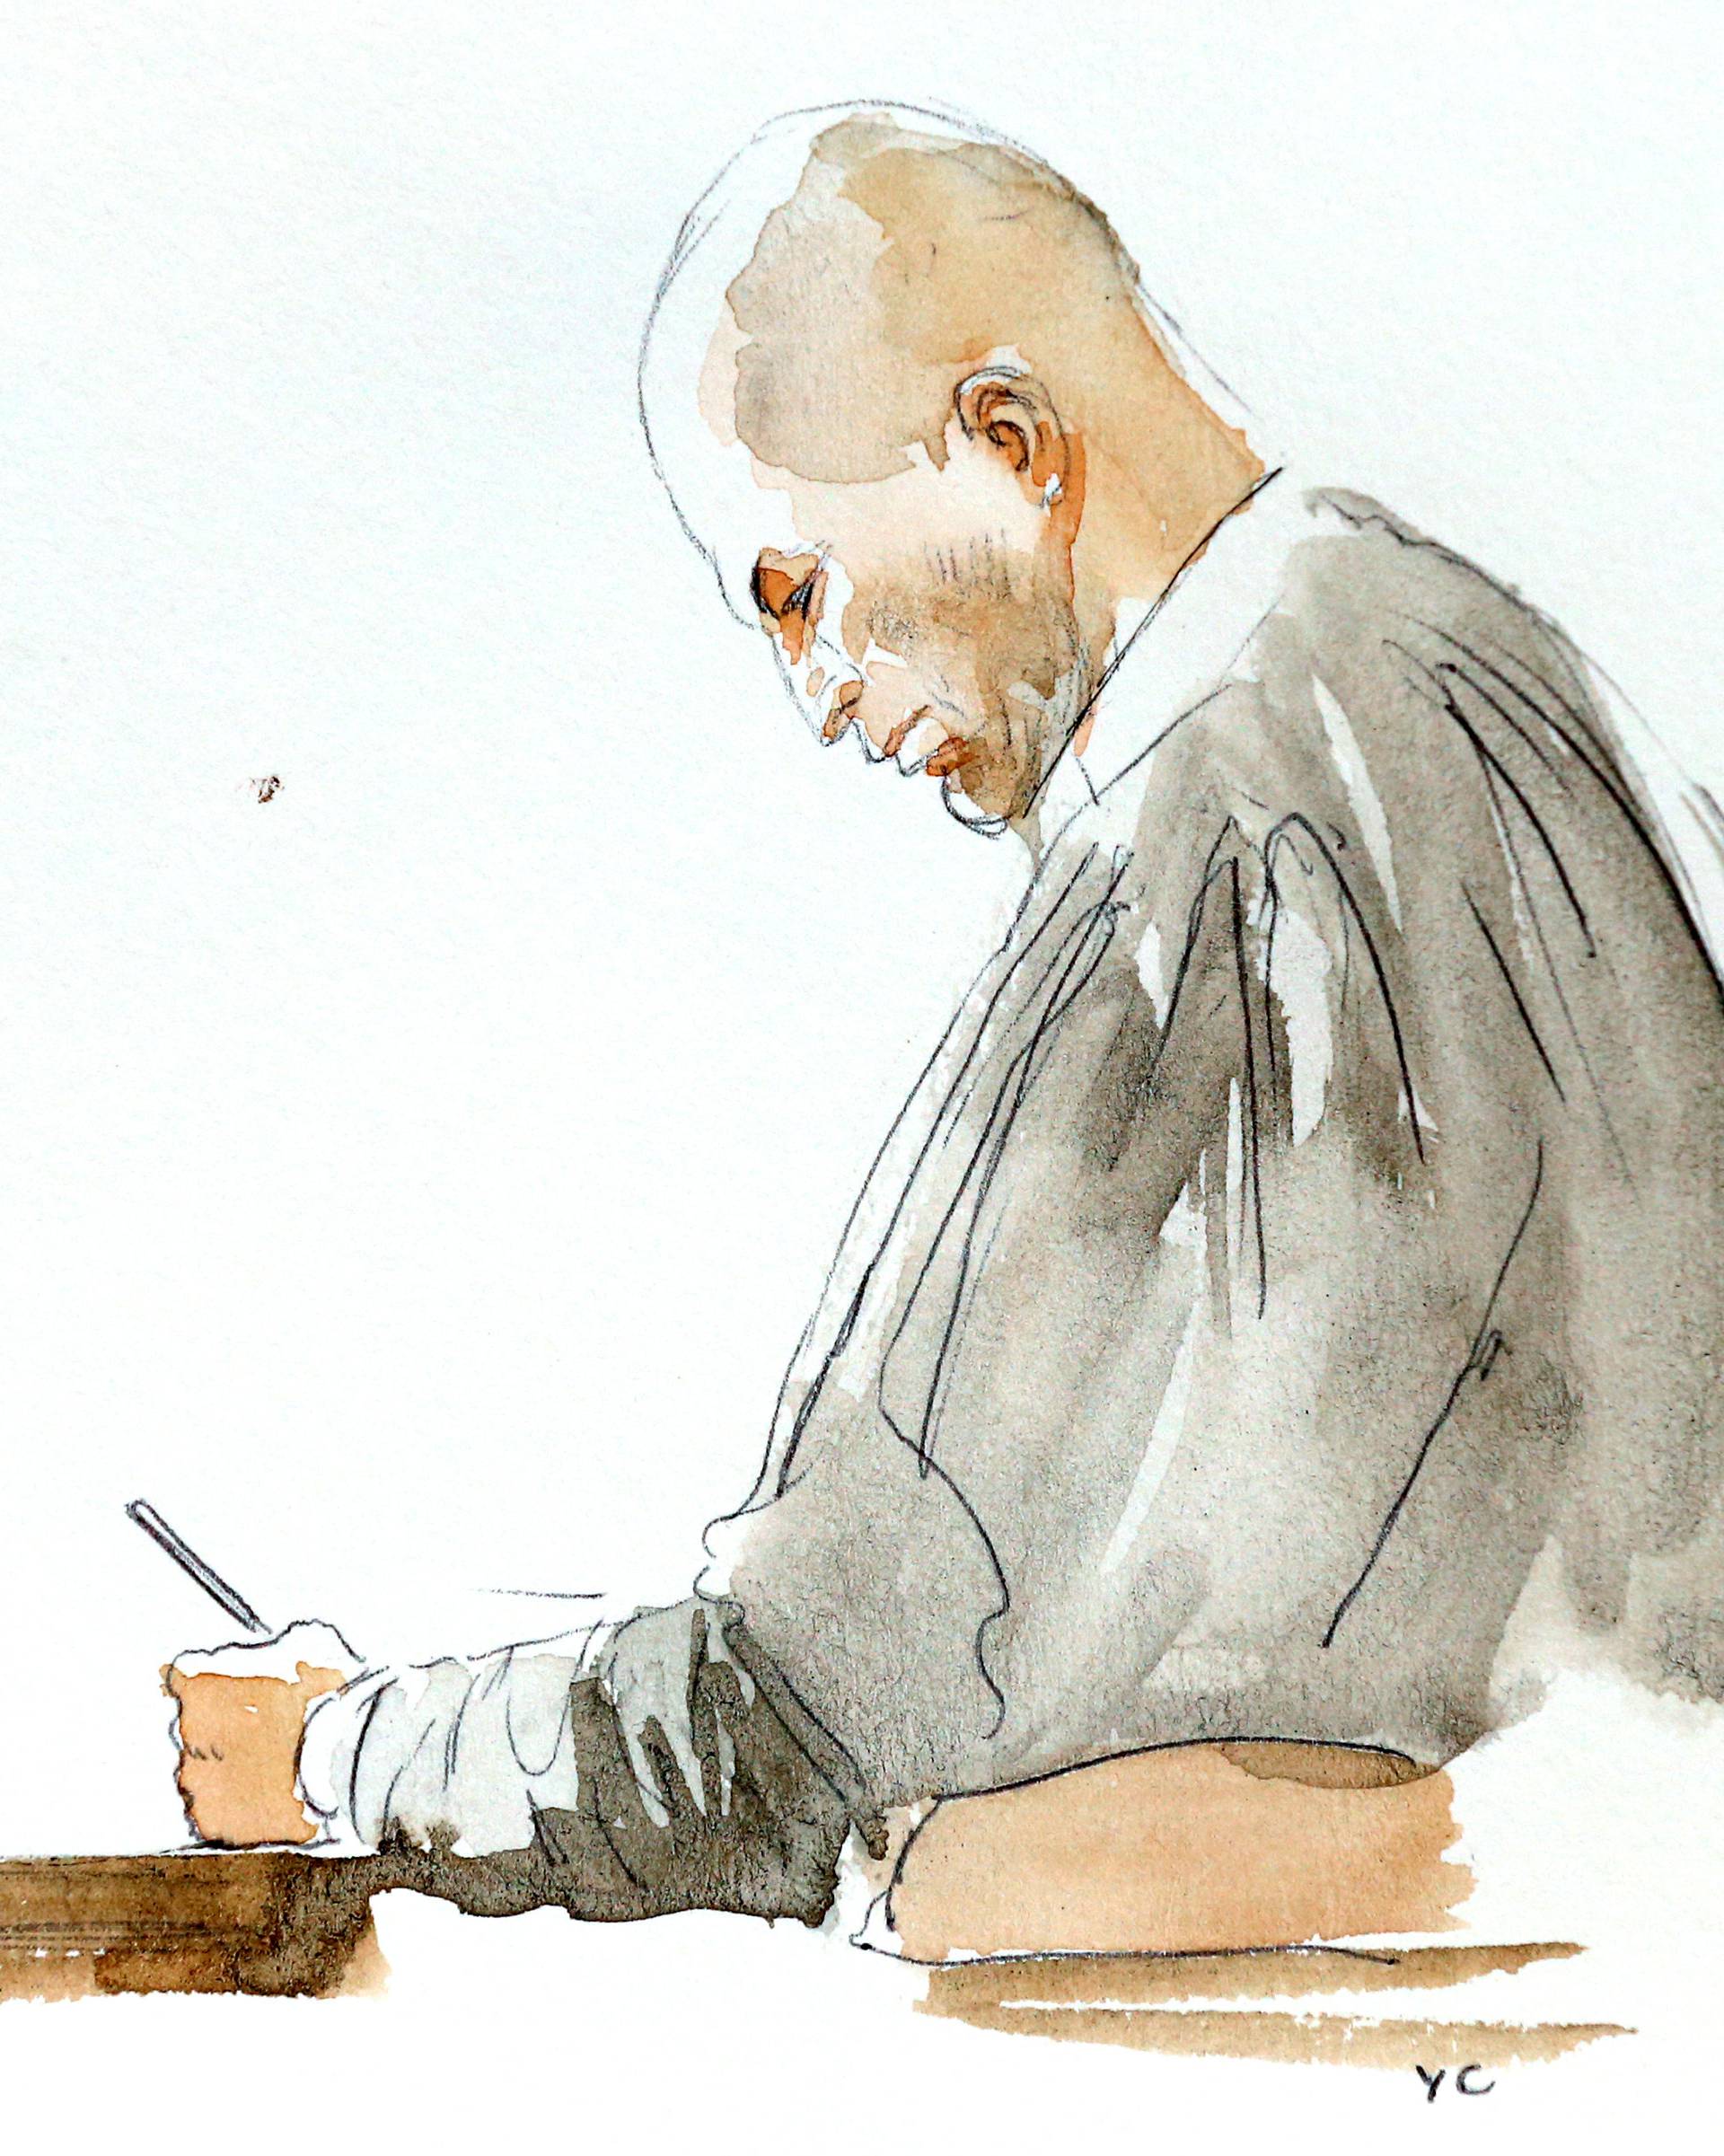 A court artist drawing shows Belgian lawyer Mary, who is defending Salah Abdeslam, one of the suspects in the 2015 Islamic State attacks in Paris, in court during his trial in Brussels